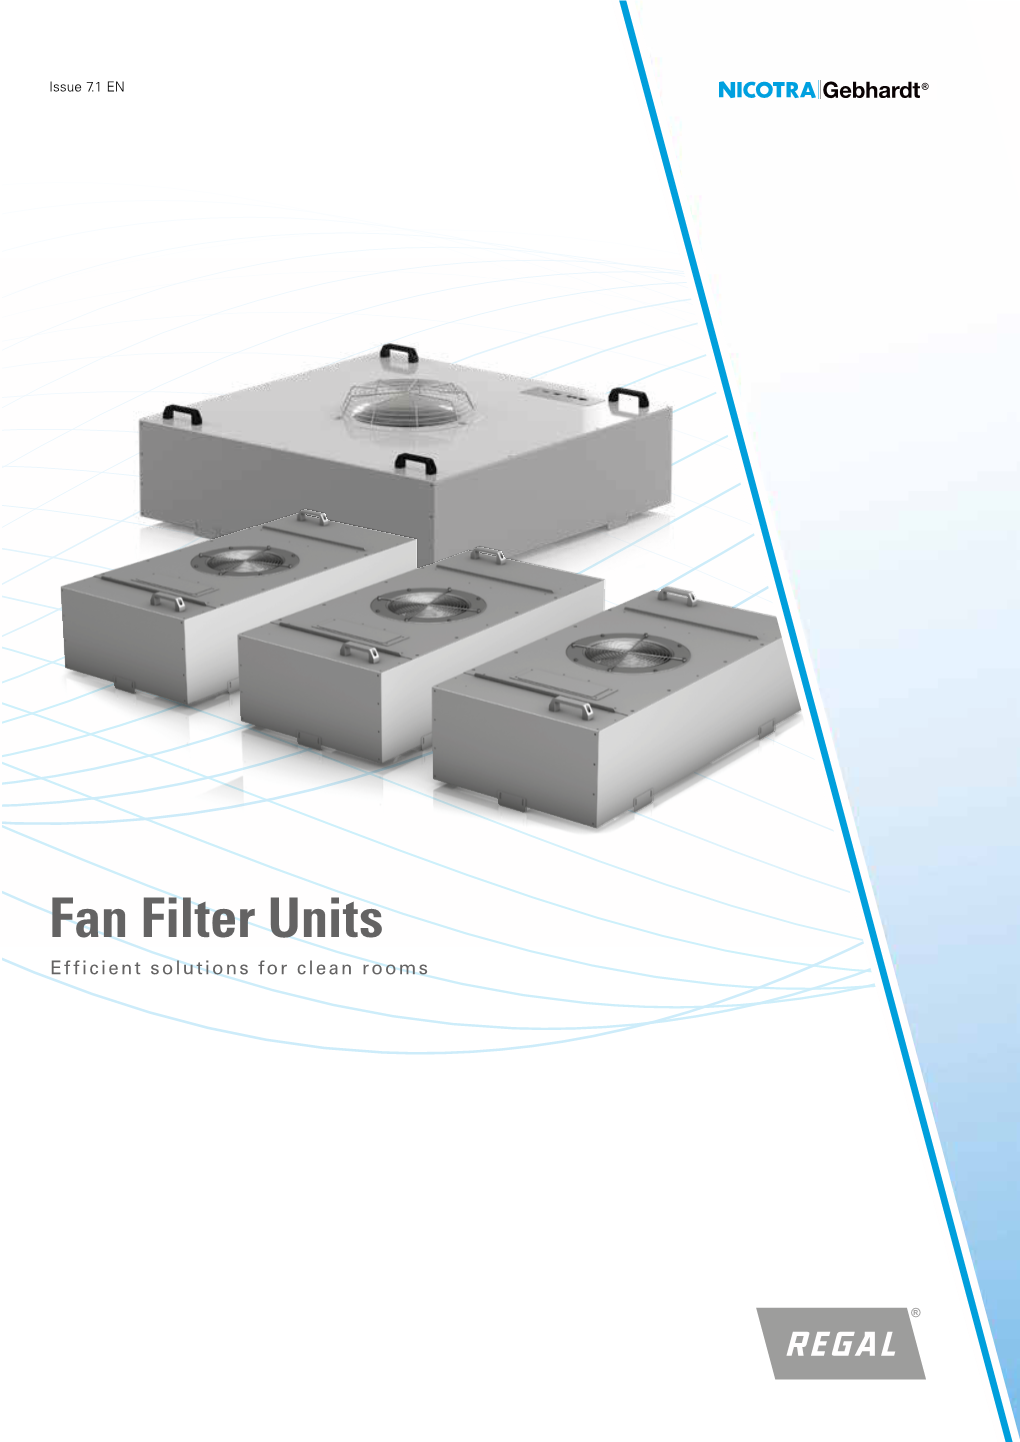 Fan Filter Units Efficient Solutions for Clean Rooms Fan Filter Units (FFU) the Future Has Begun – You Need to Build It In